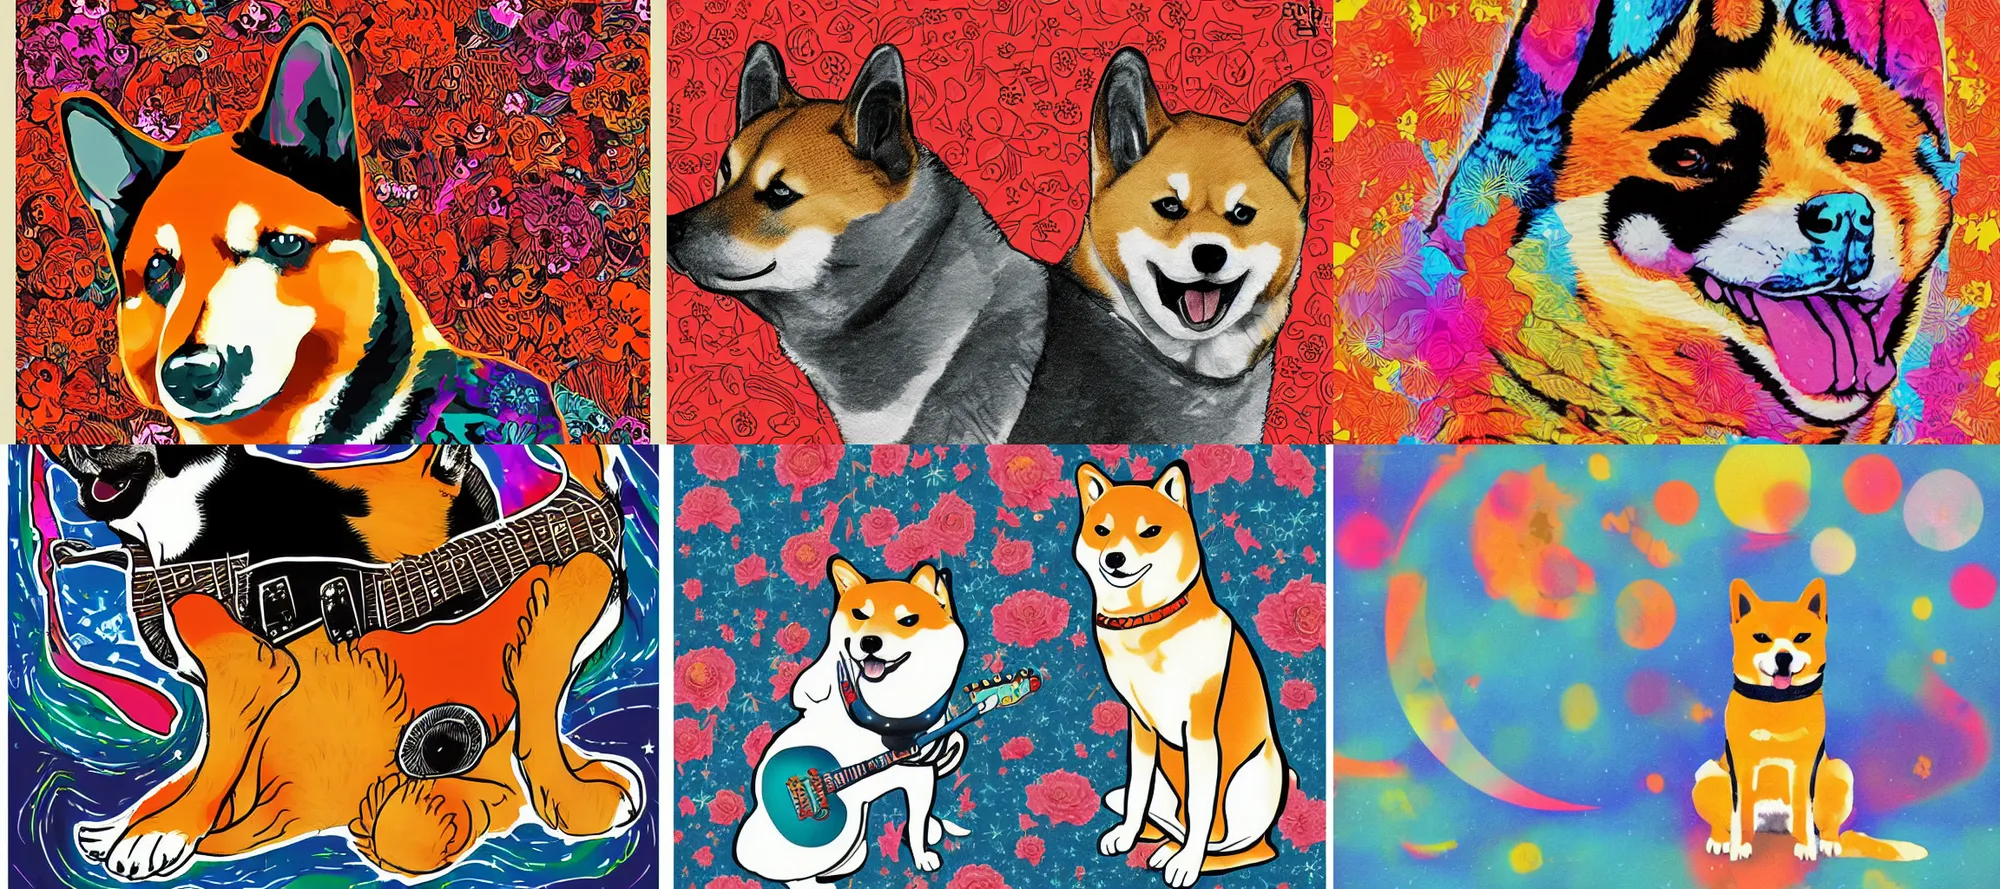 Prompt: Shiba Inu illustration in the style of a jimmy hendrix poster